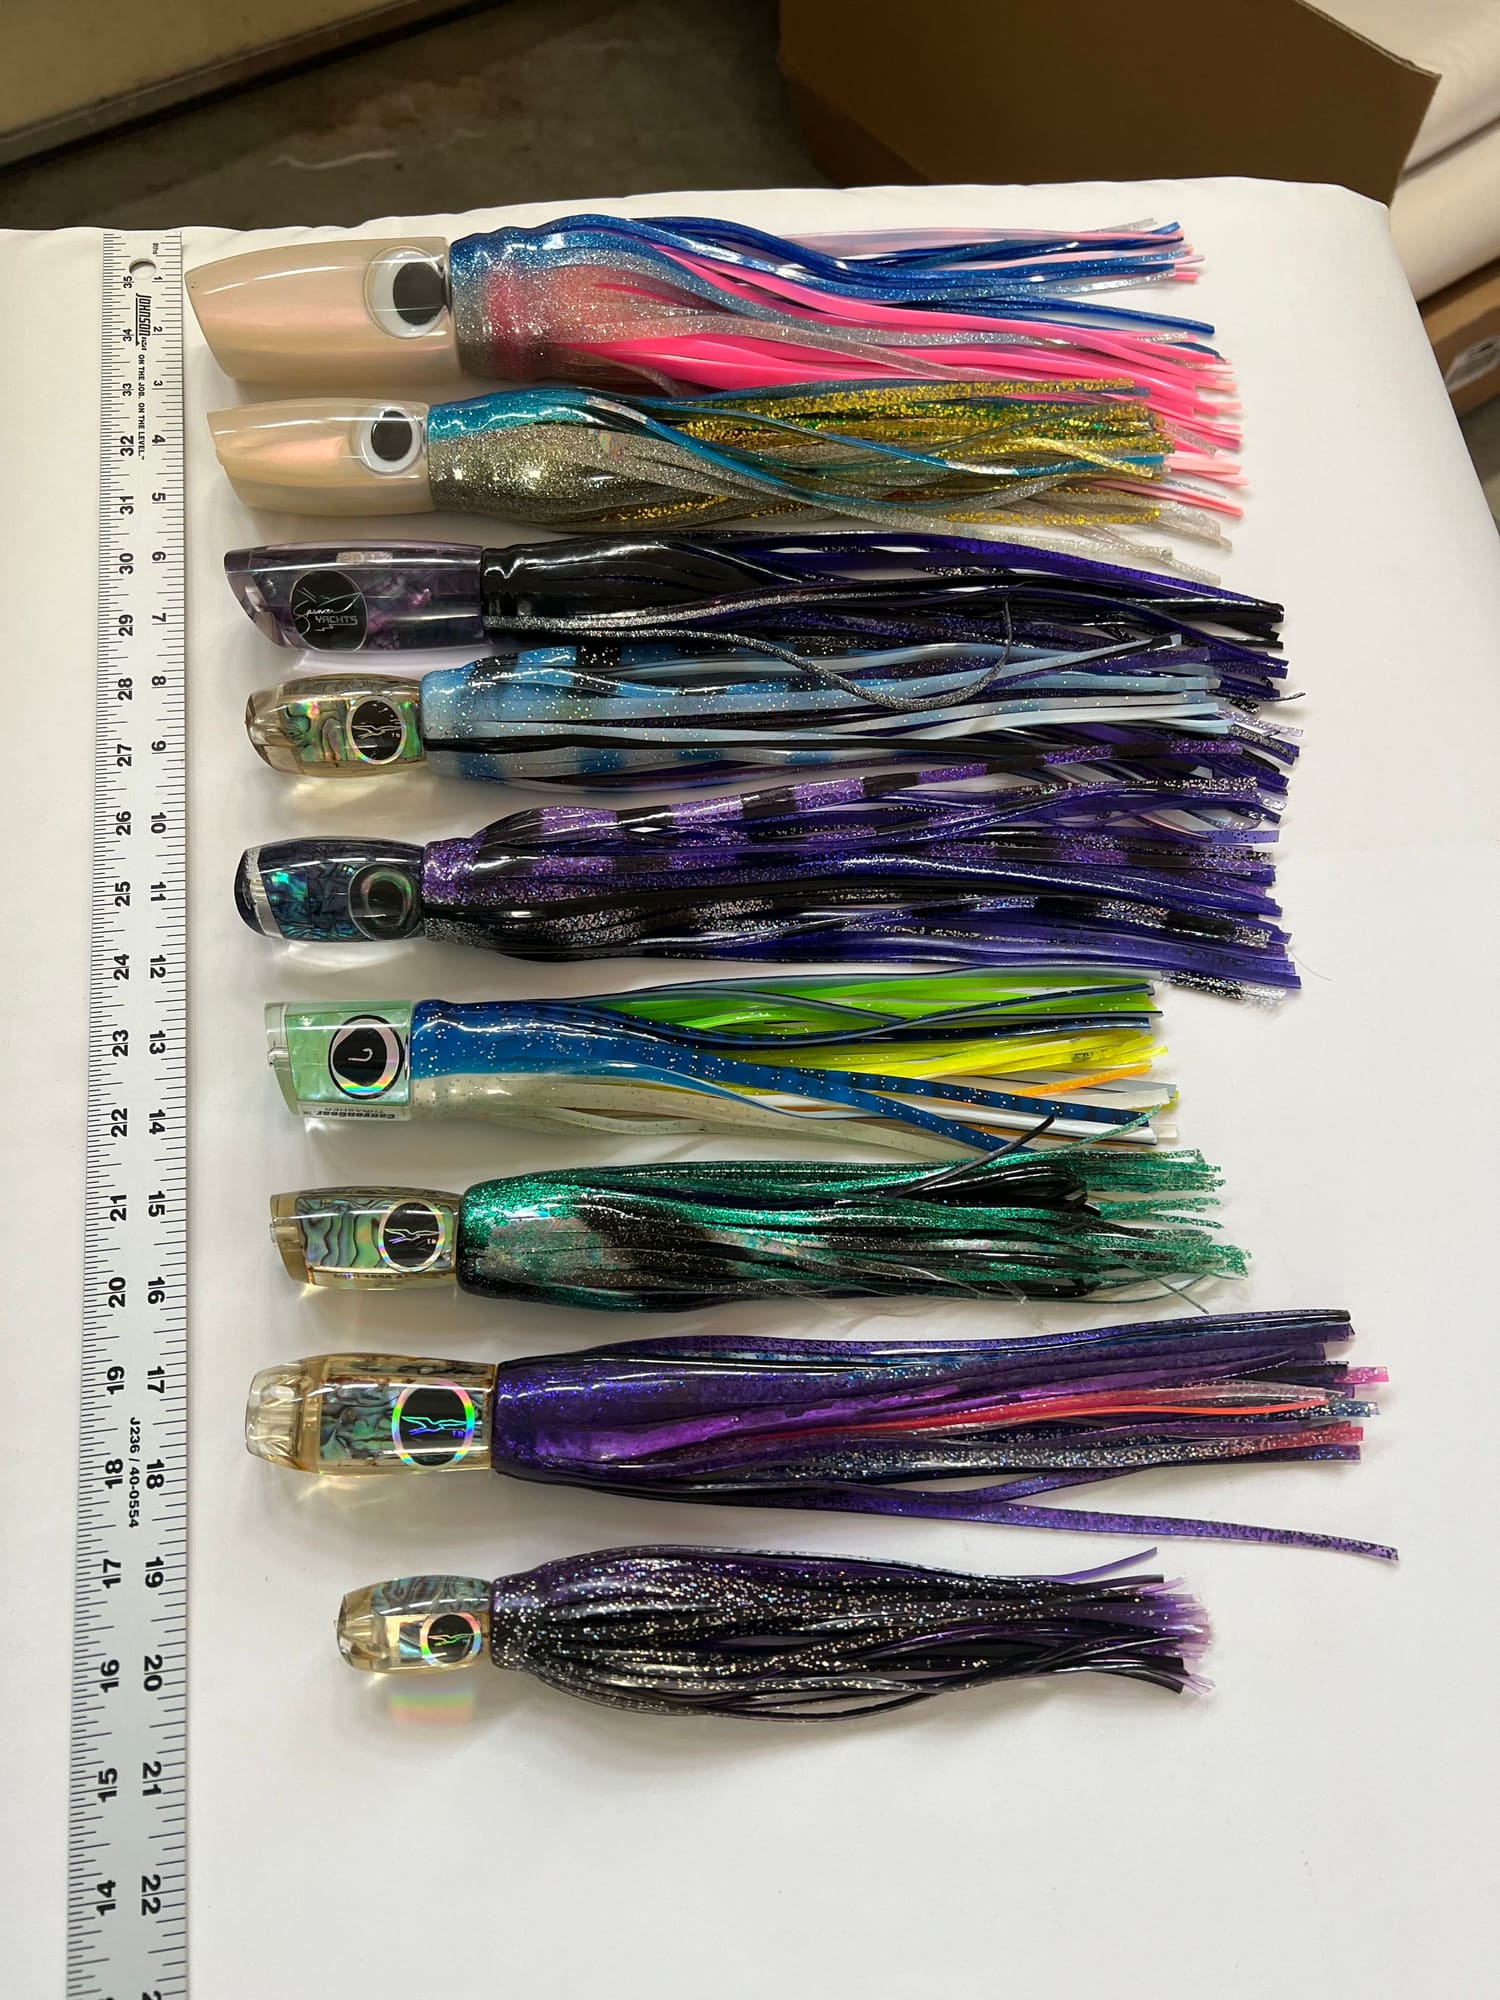 Black Bart, Moyes, Fathom Resin Lures - The Hull Truth - Boating